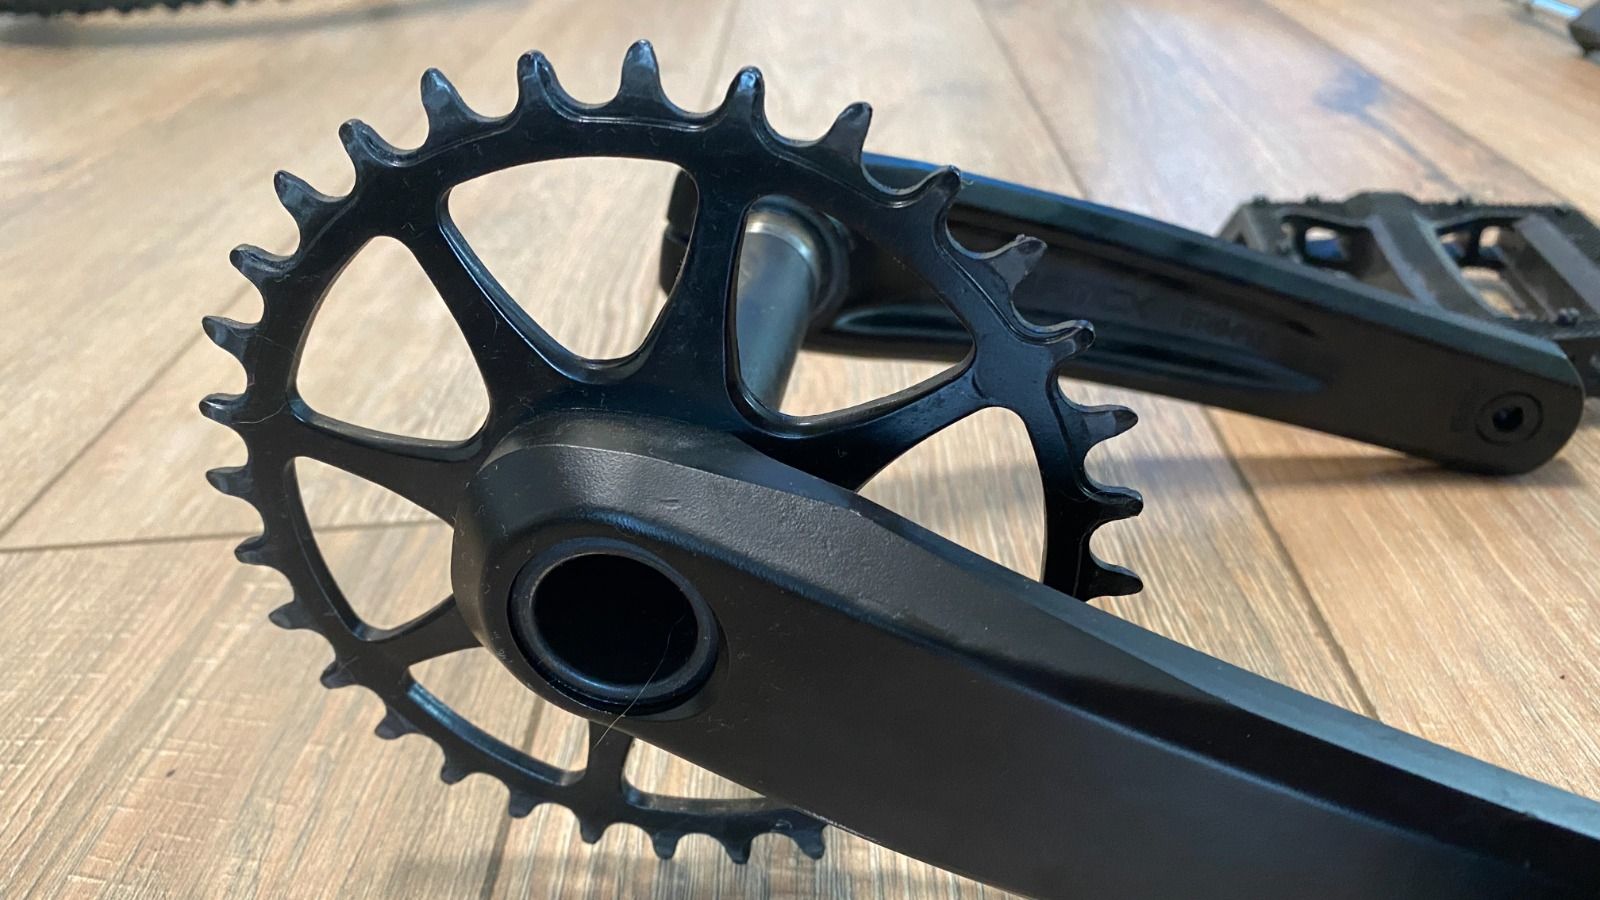 Marin Forged Alloy, Integrated Steel 32T Narrow Wide Chainring, Boost Spacing